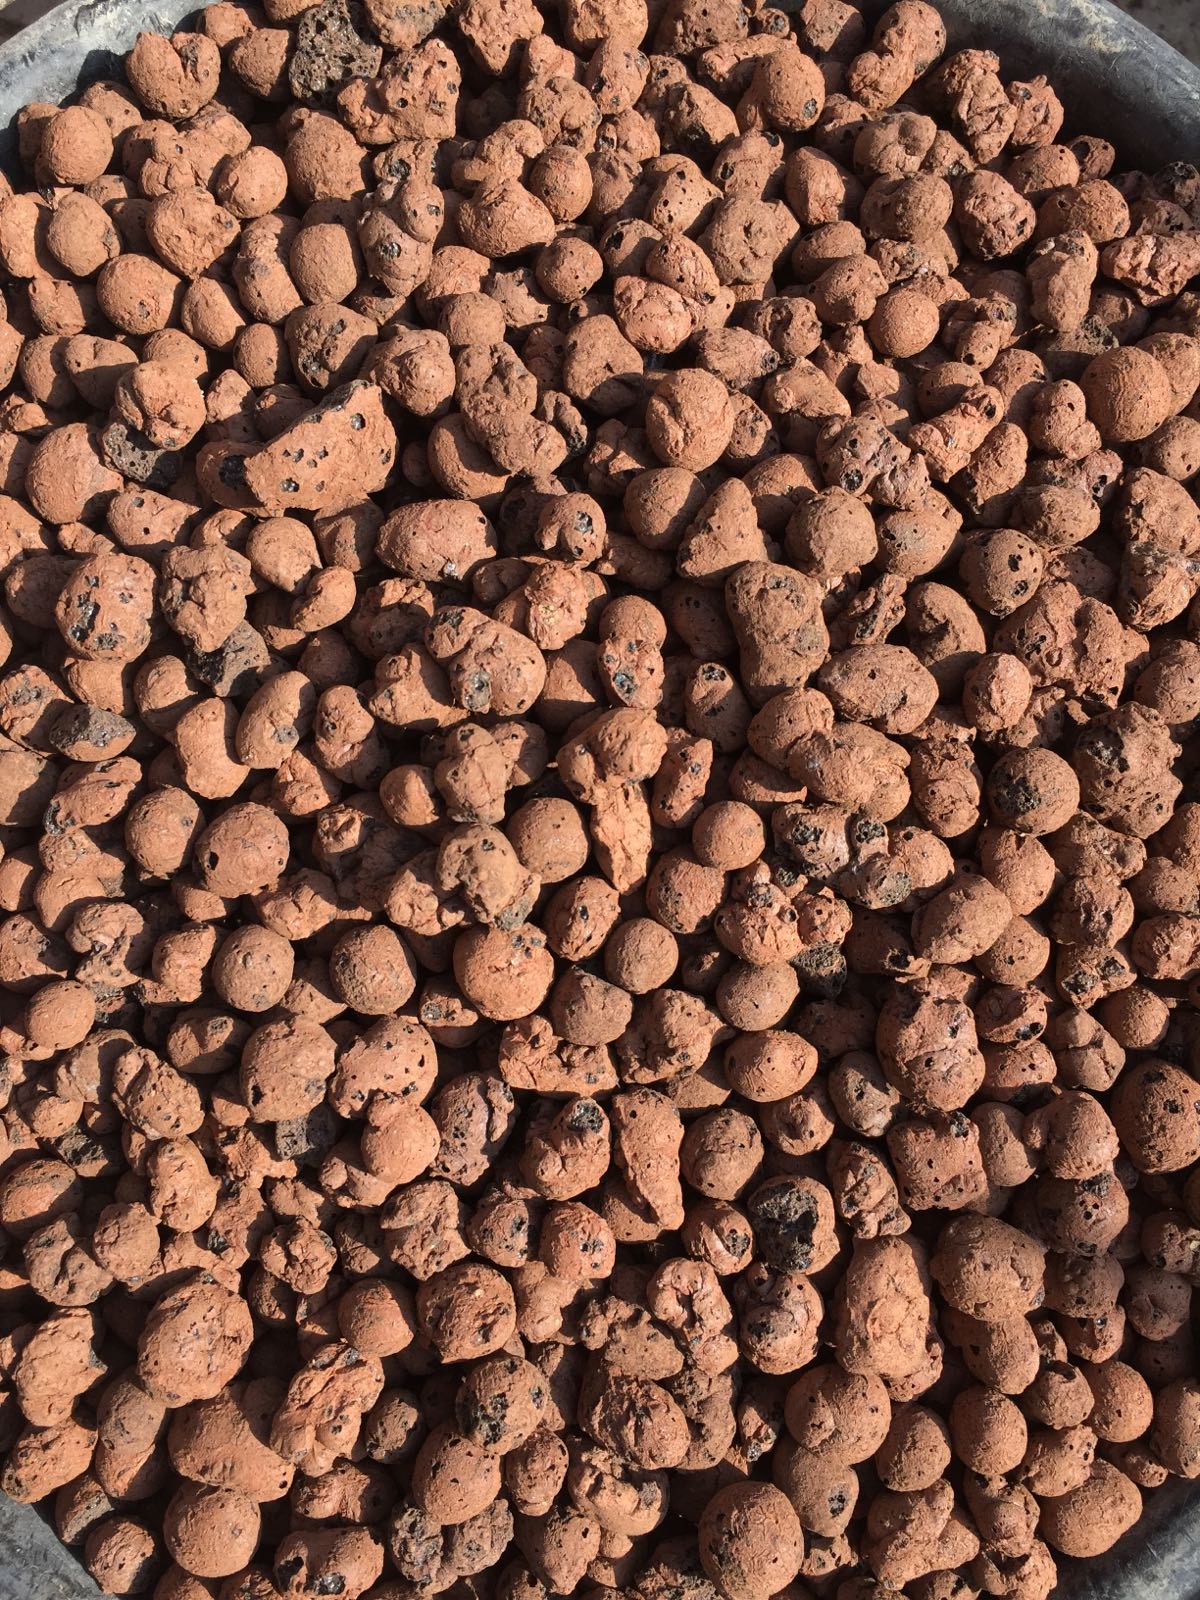 LECA - Light Expanded Clay Aggregate